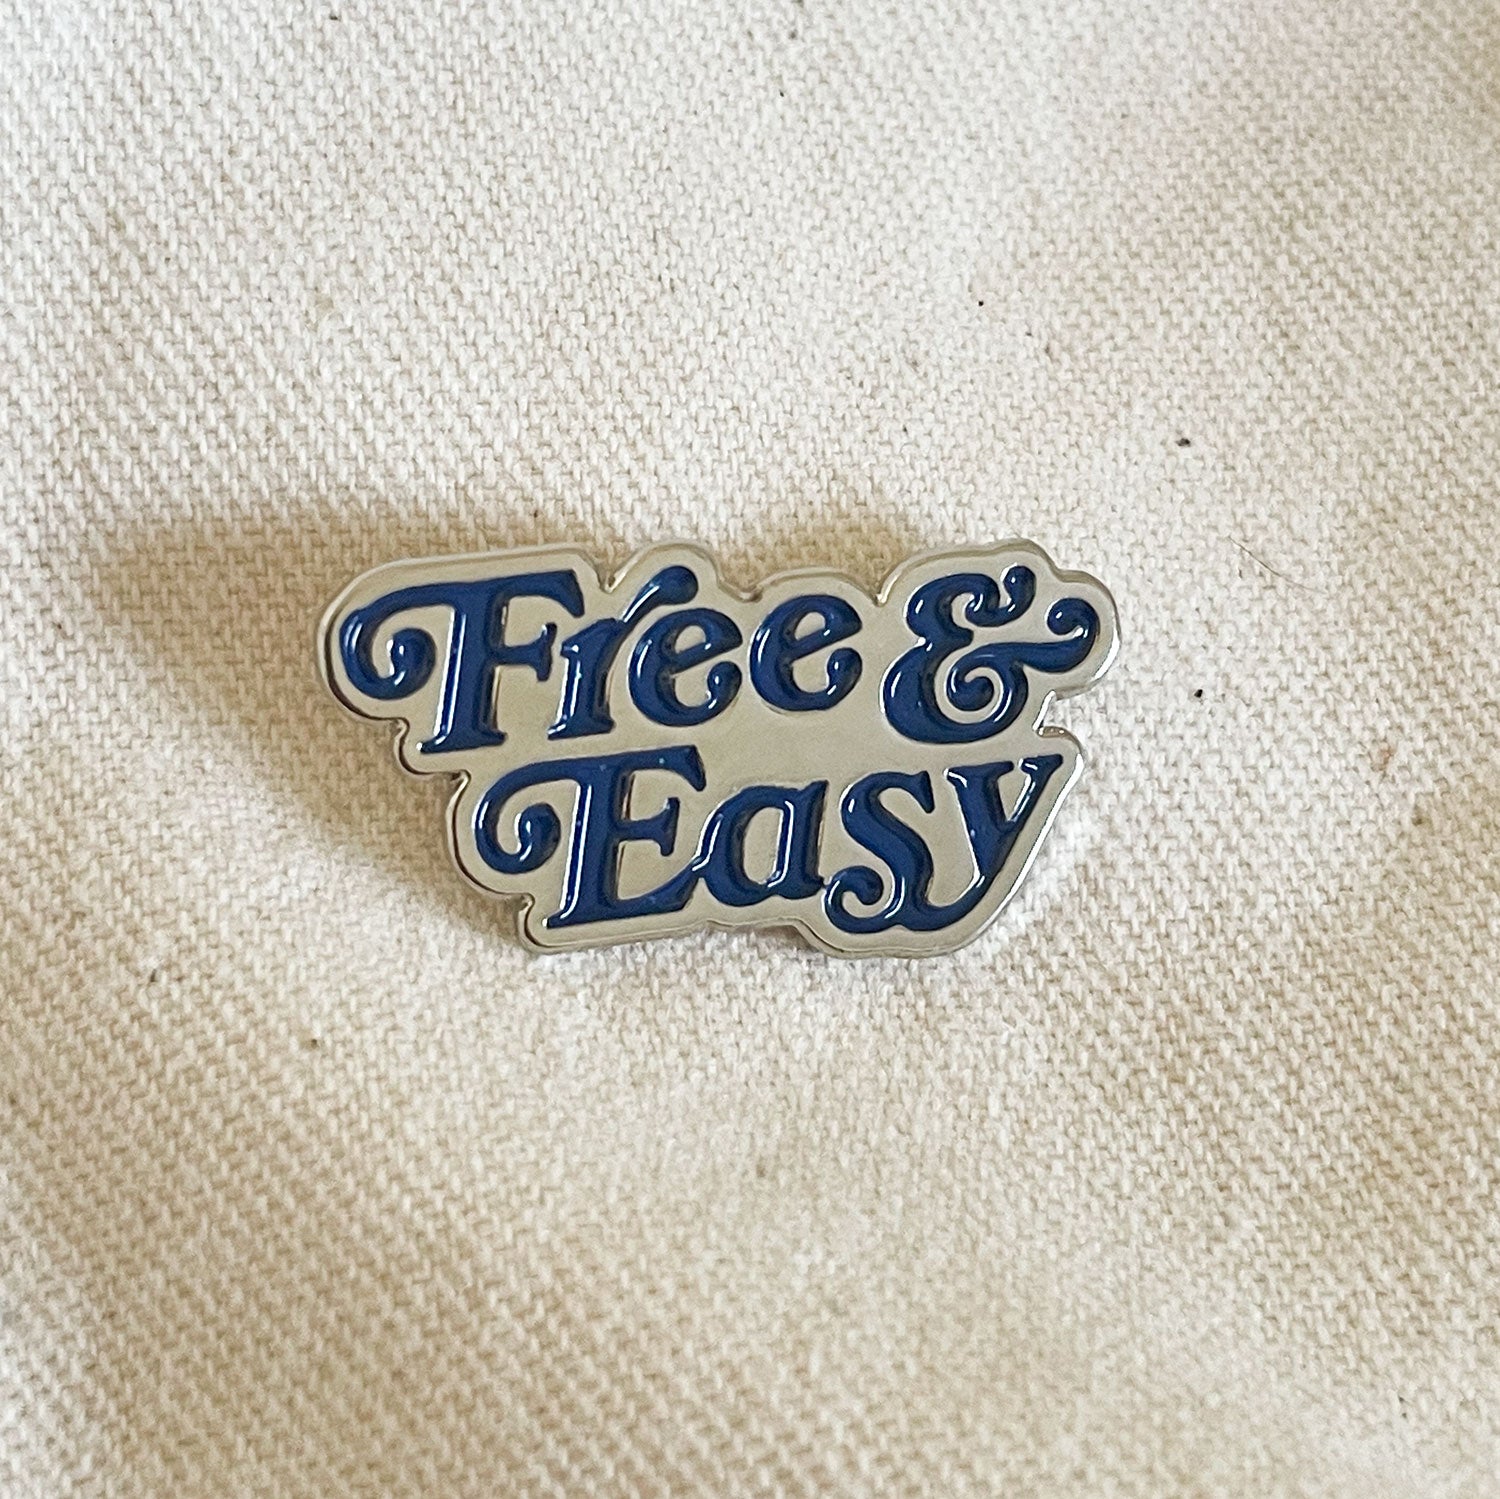 Free & Easy Enamel Pin in navy and silver on a natural background -Free & Easy